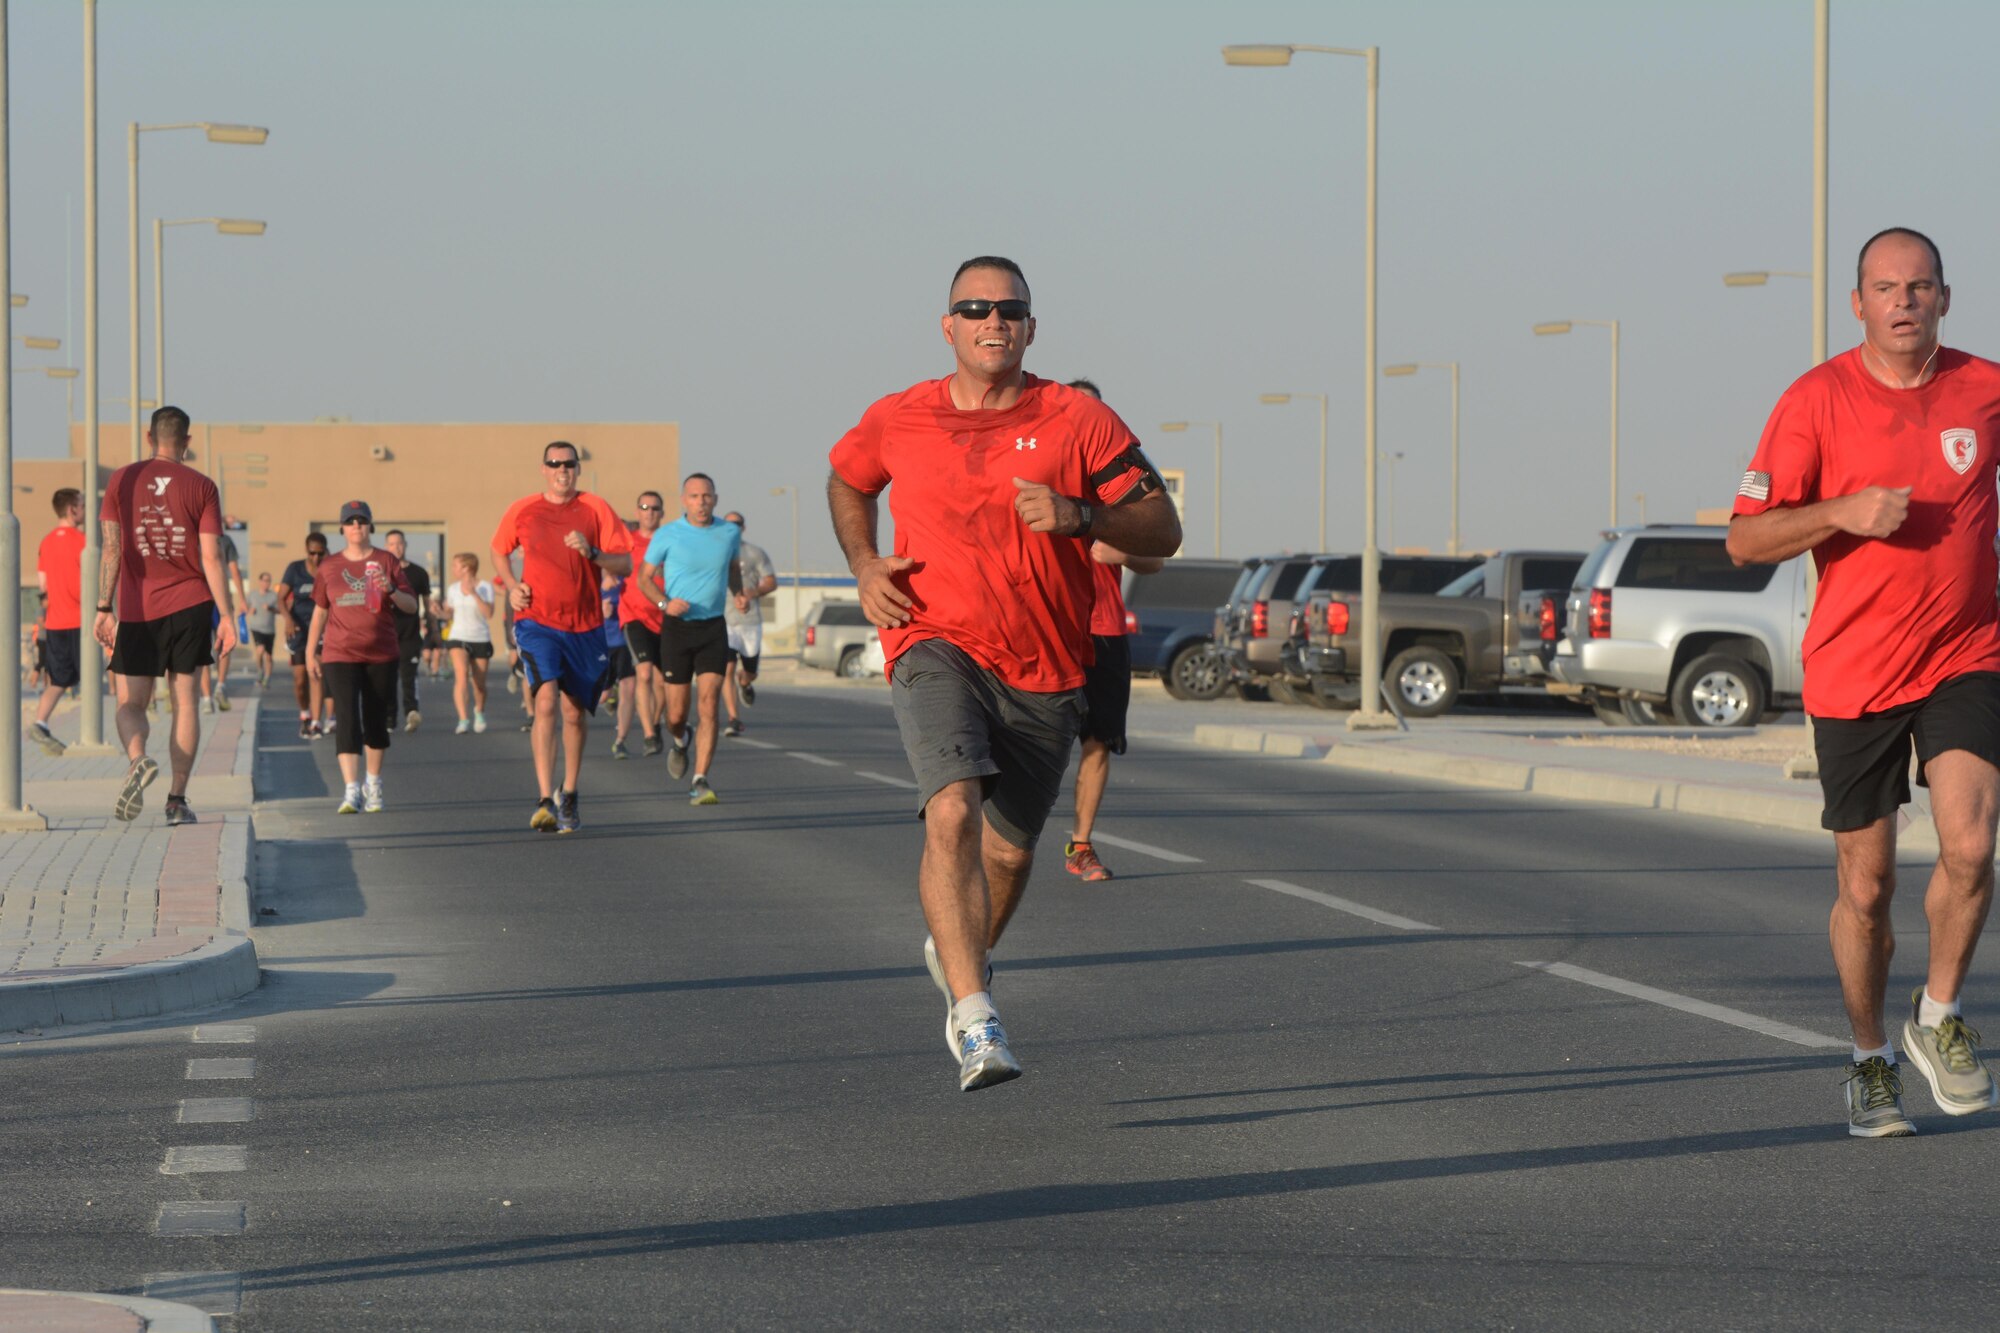 Runners race to the finish line of the Dignity and Respect 5K Oct. 23, 2015 at Al Udeid Air Base, Qatar. The 3.1 mile race was organized to foster a culture of dignity and respect among service members. (U.S. Air Force photo by Tech. Sgt. James Hodgman/Released)
